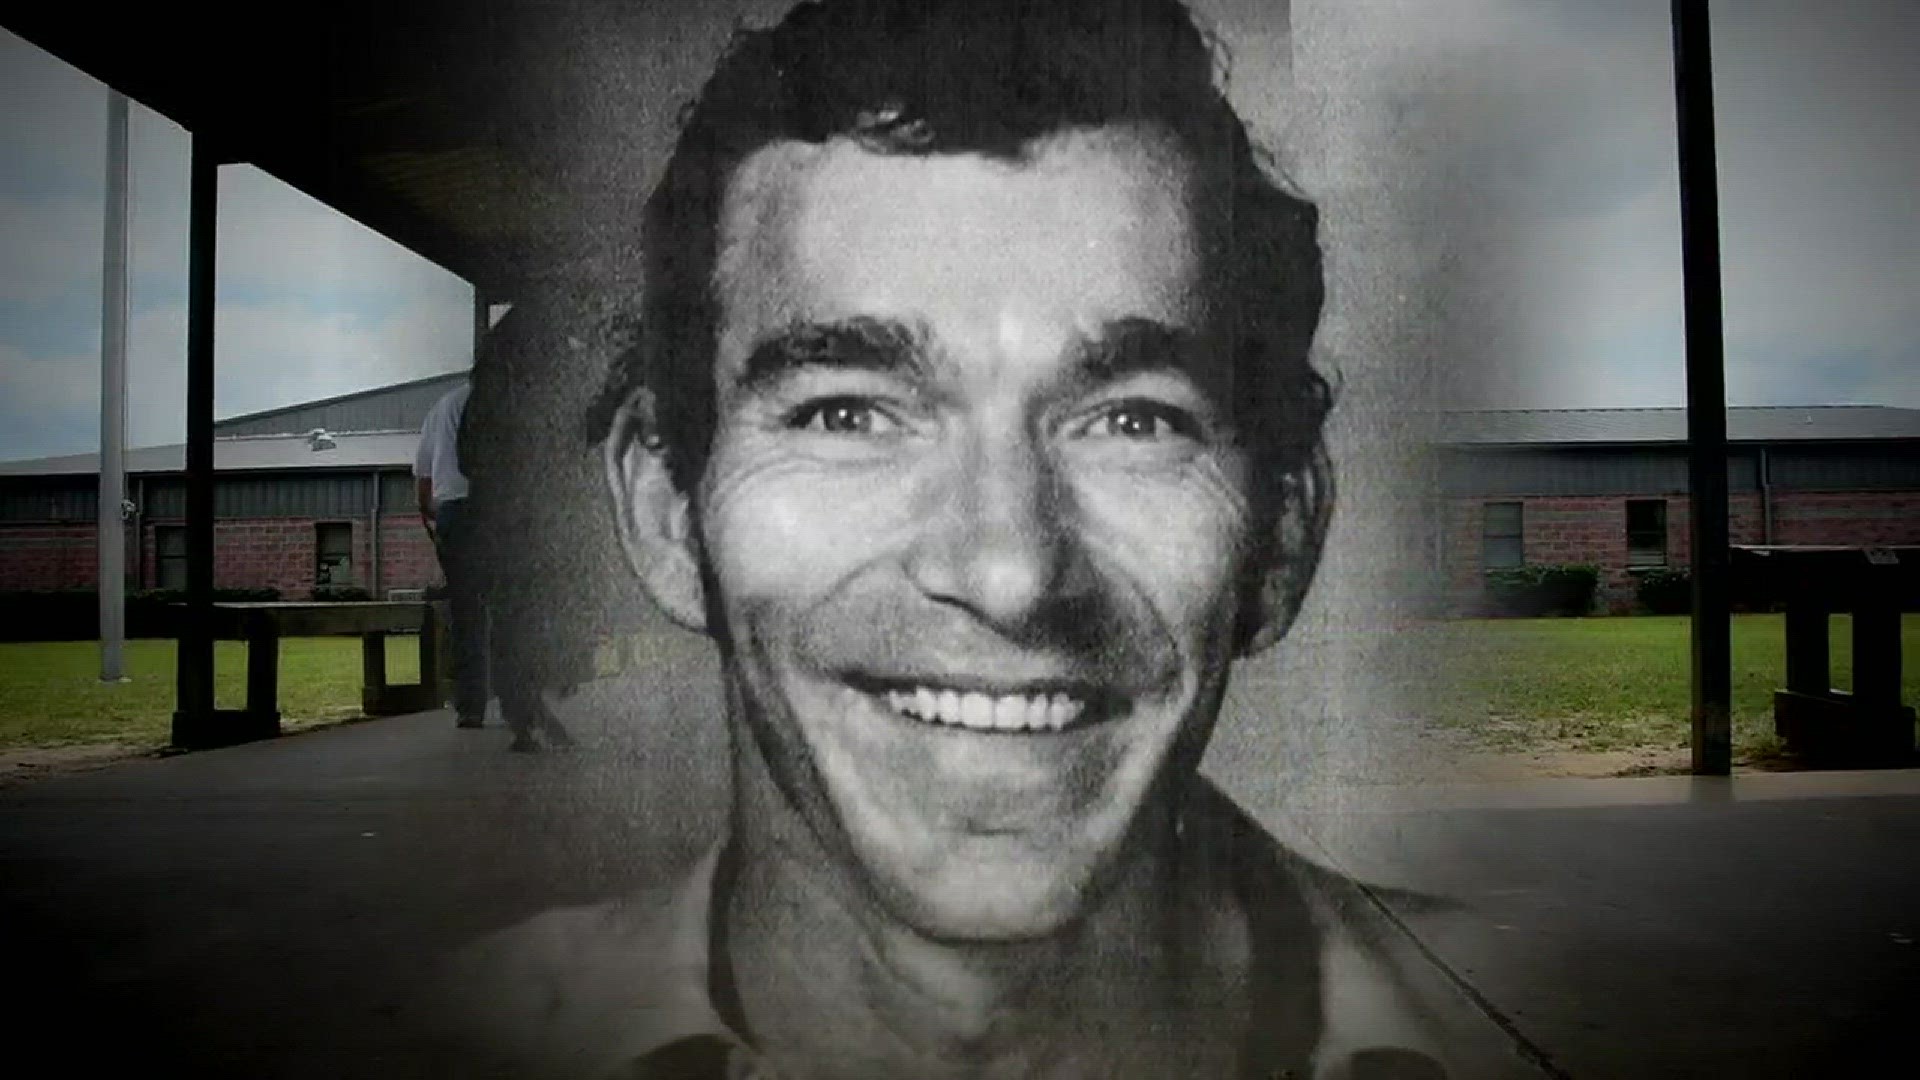 Murray Burr, a long-time janitor for the local school district, was stabbed 28 times in 2004.